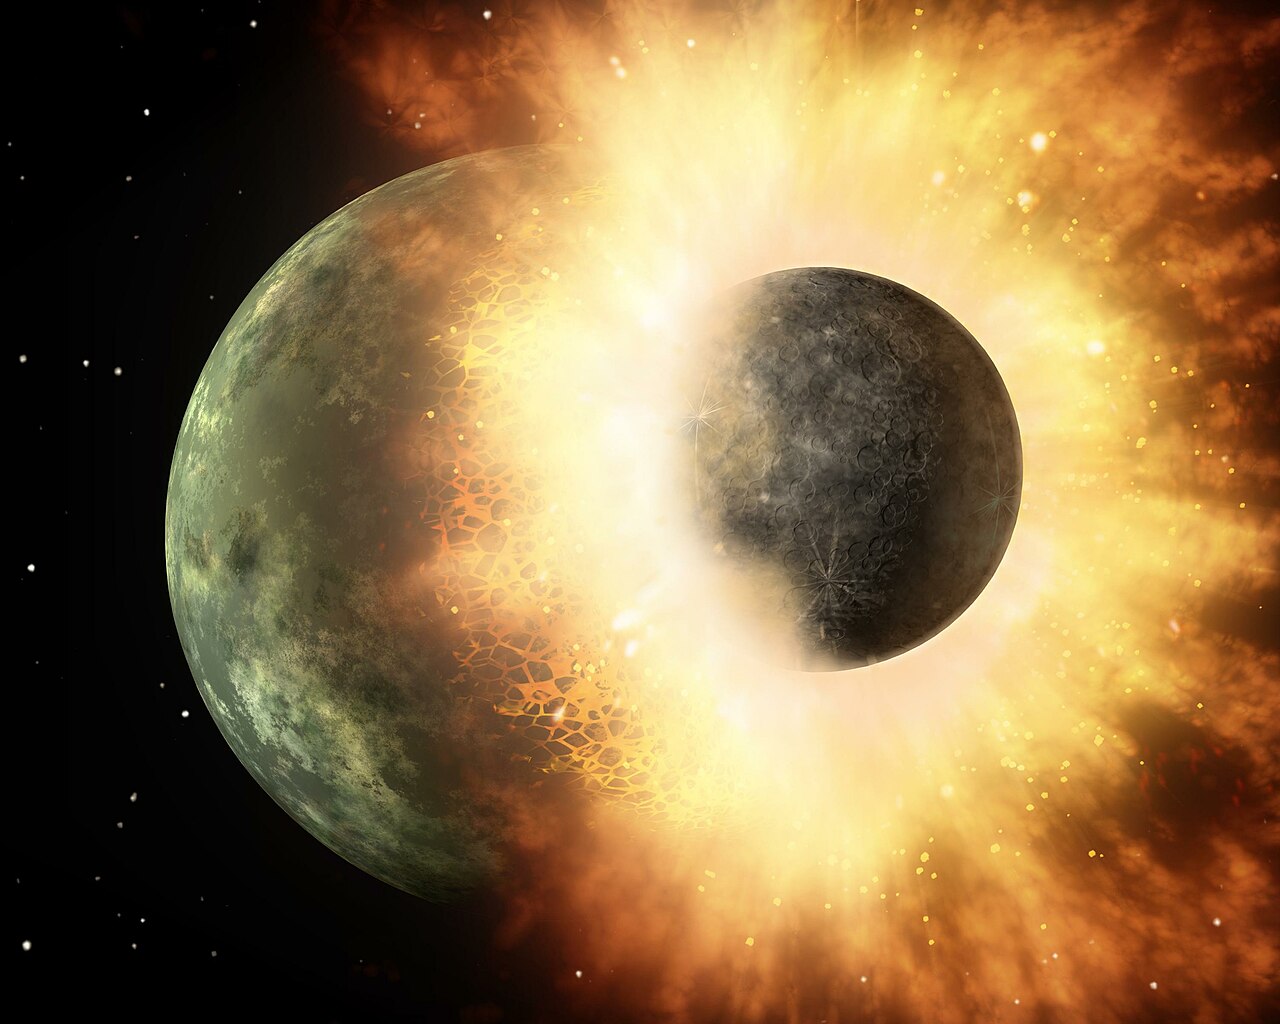 Giant collisions with moon-sized objects explain the presence of gold and platinum in the Earth’s mantle